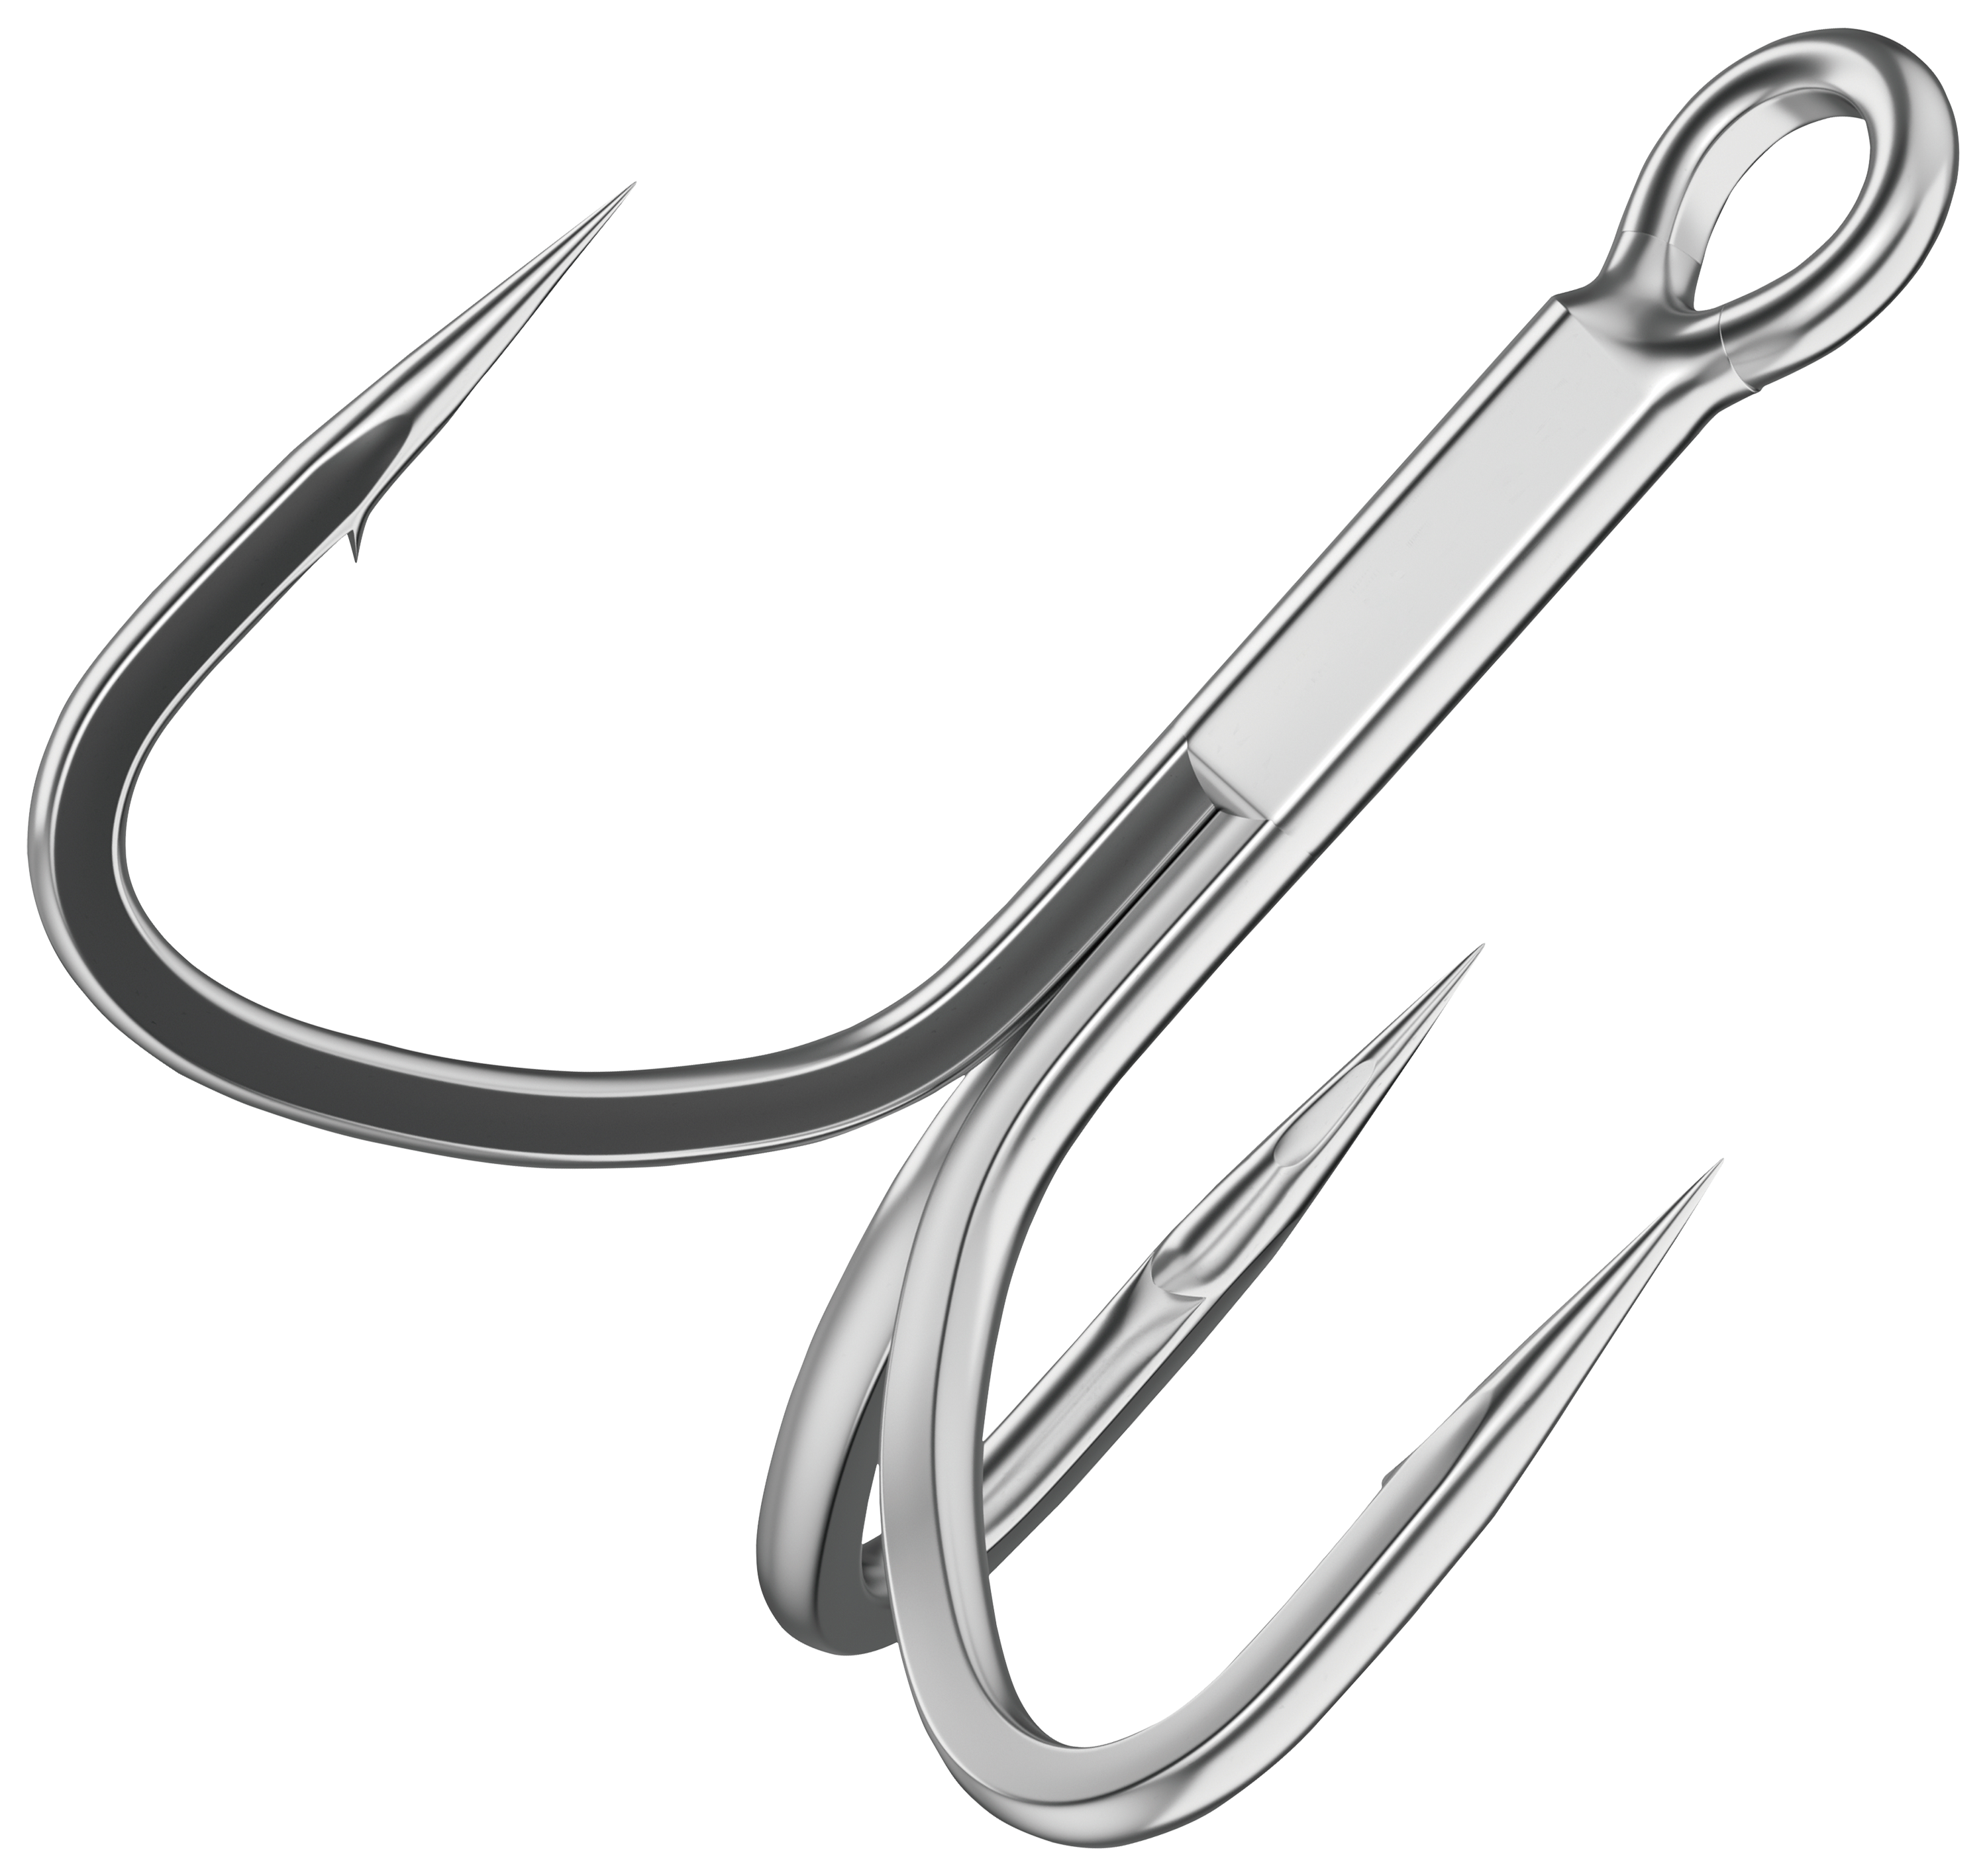  BKK VIPER-41 Treble Hook, 1/0, 6-Pack, 4X, Saltwater  Corrosion Resistant Bright Tin Coating, Hand Ground Point